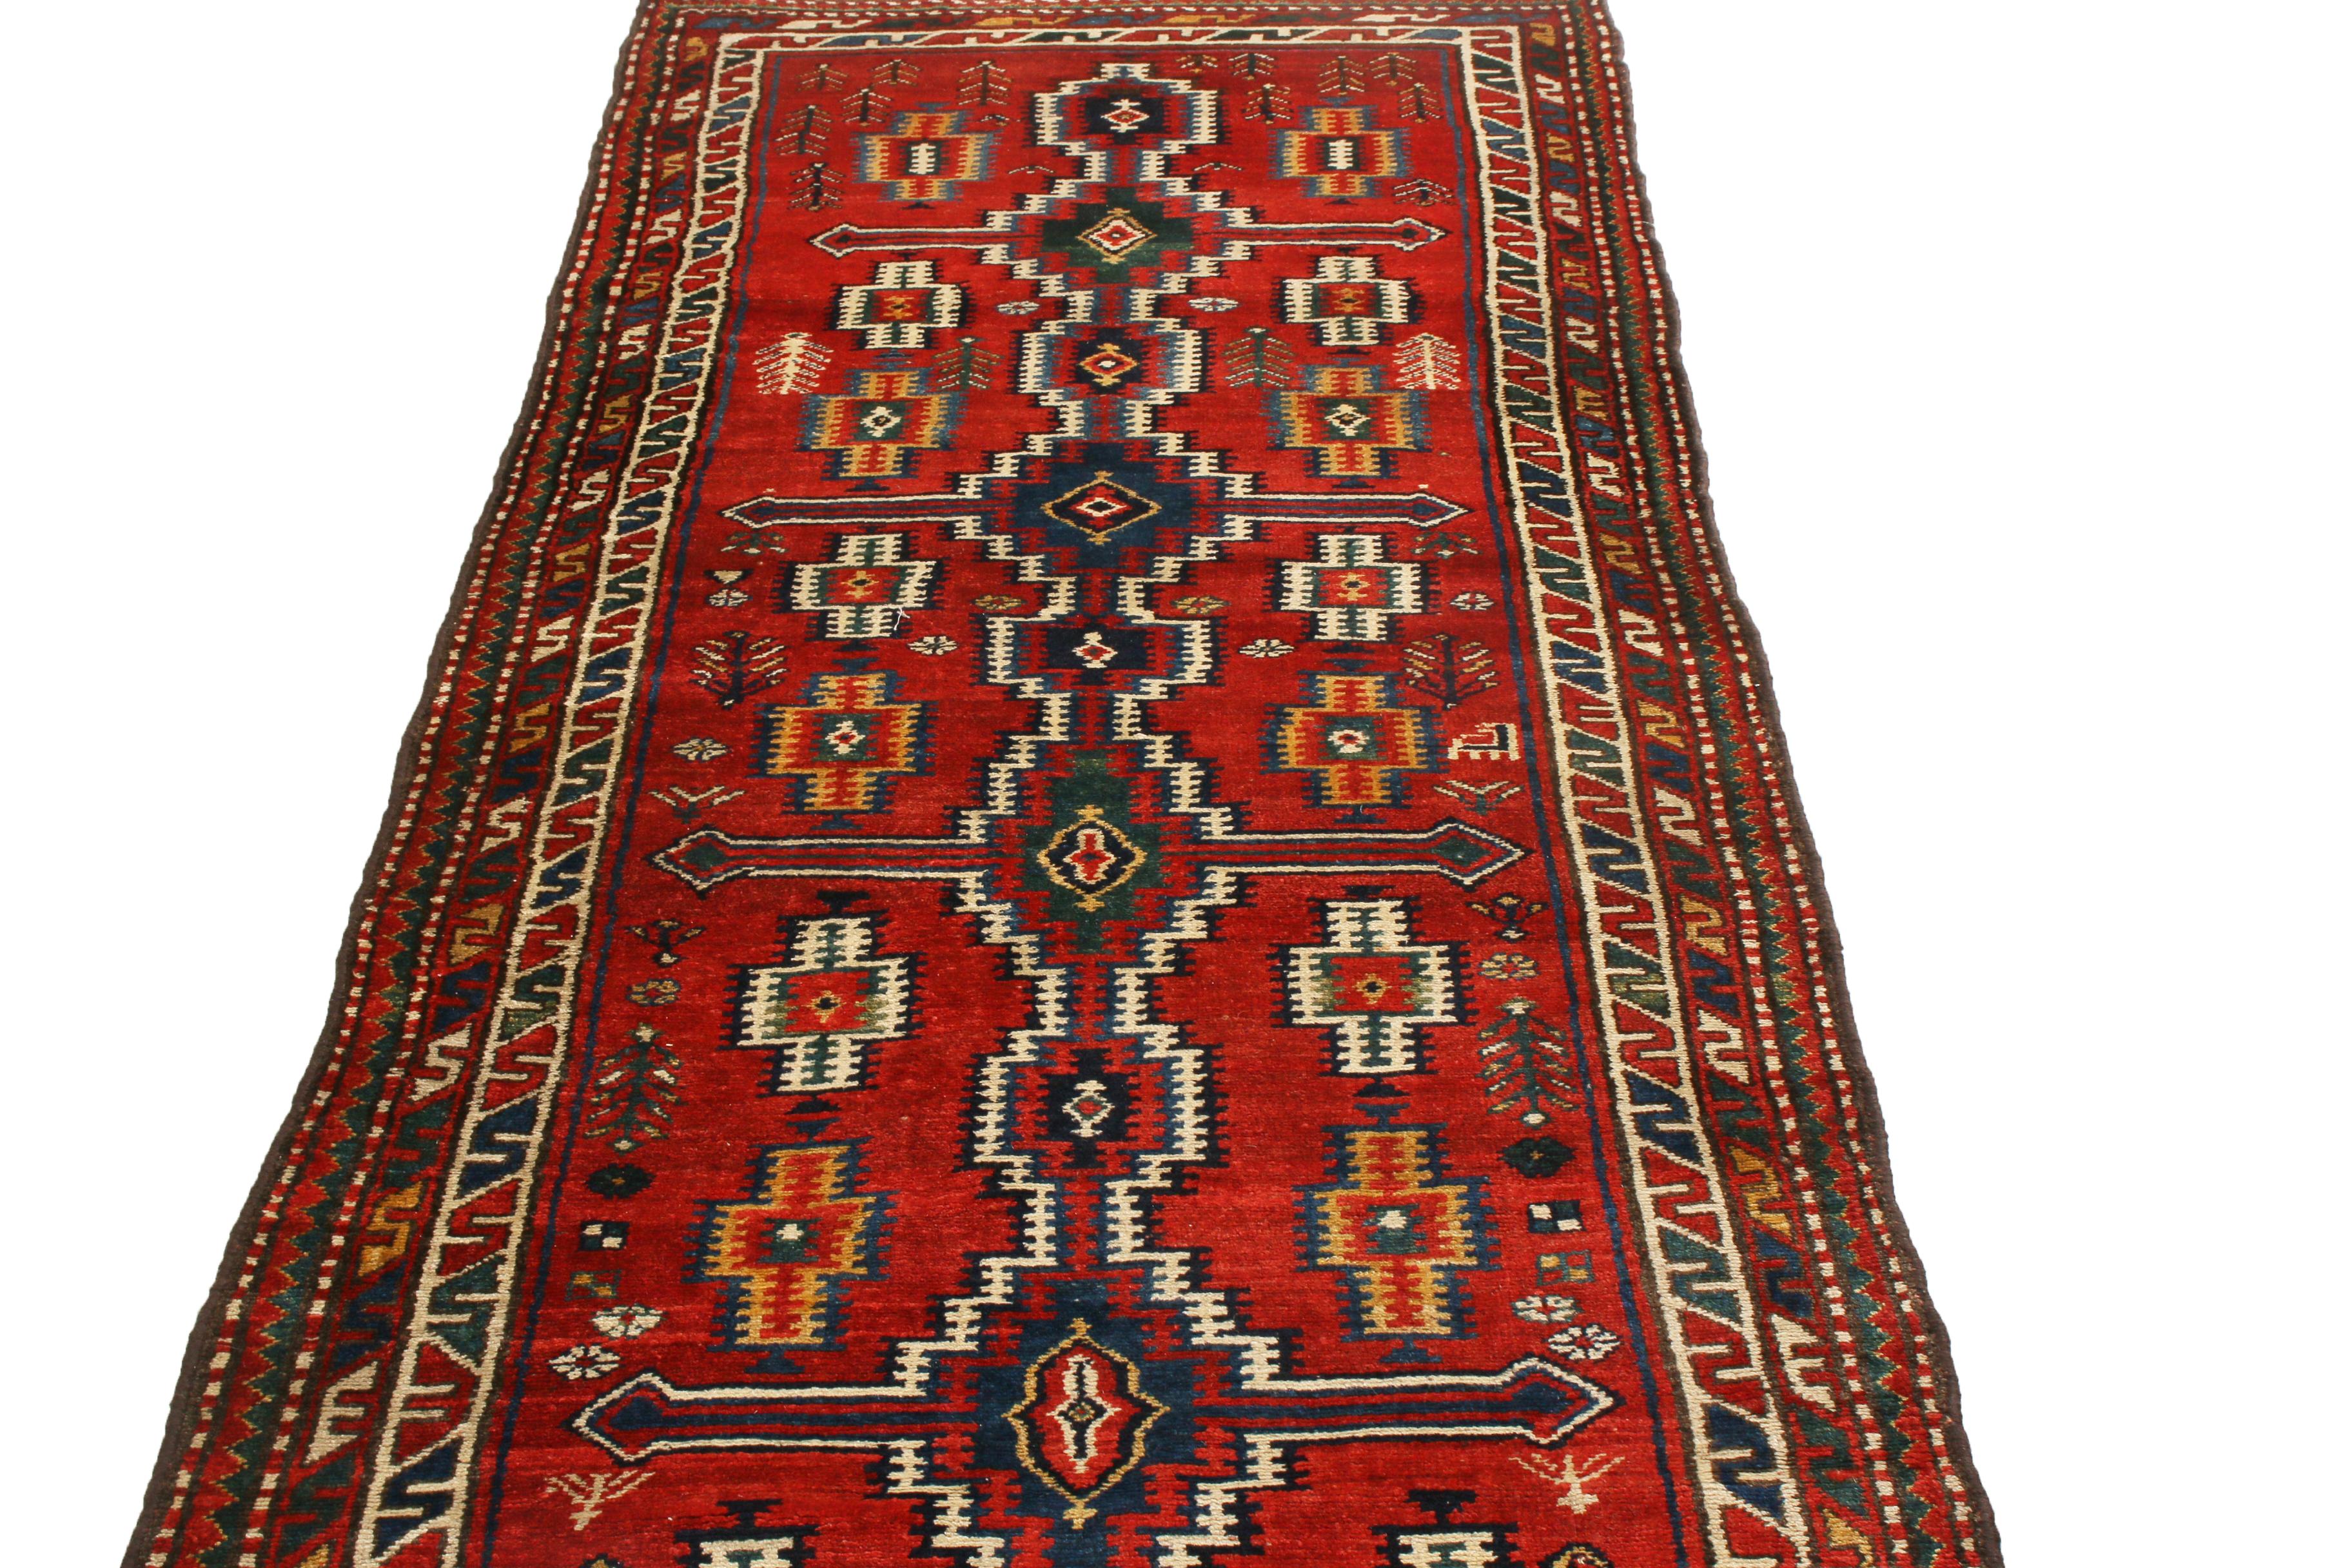 Originating from Persia in 1880, this antique Persian runner features a Northwest design, denoting a varied, traveled array of influences from Tehran, Tabriz, and other tribal regions of the 19th century. Hand-knotted in high-quality wool, the